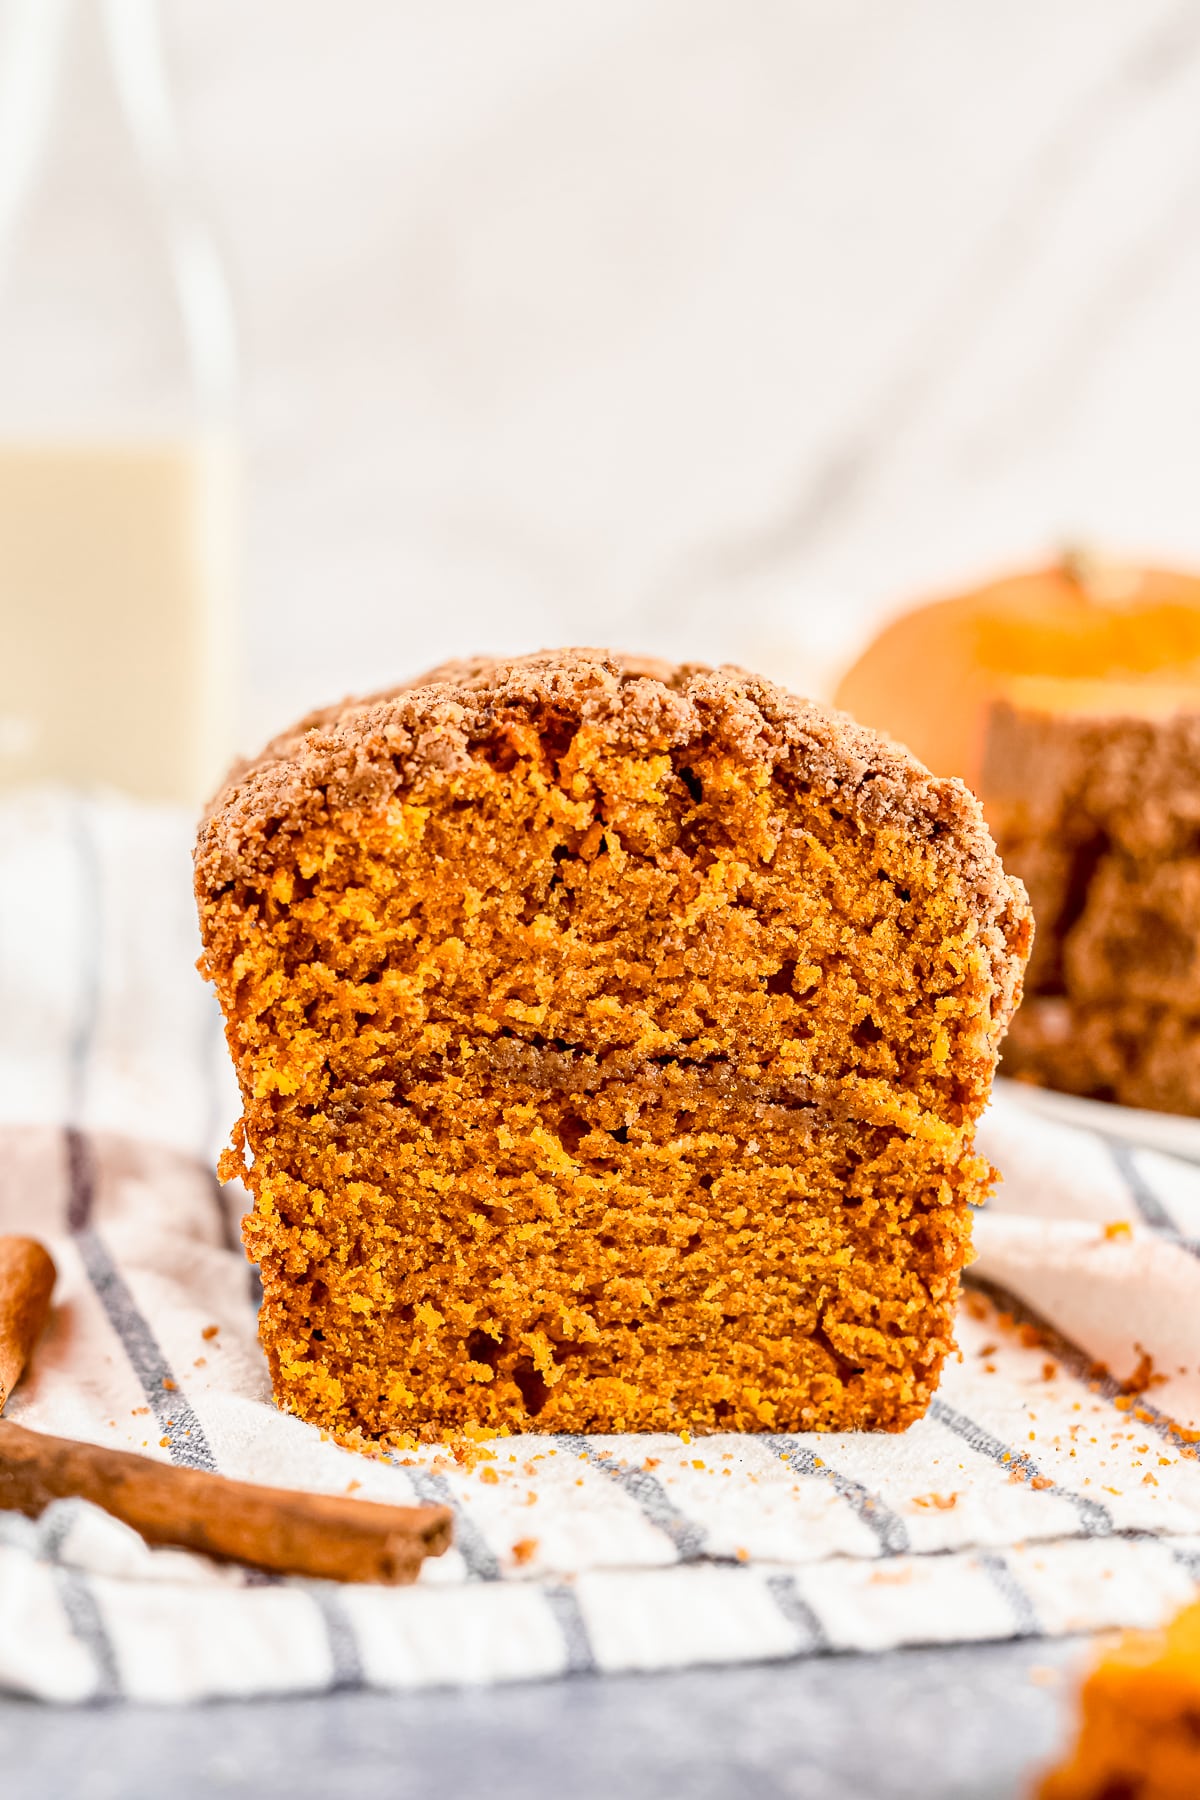 pumpkin bread with streusel topping cut in half on a kitchen towel